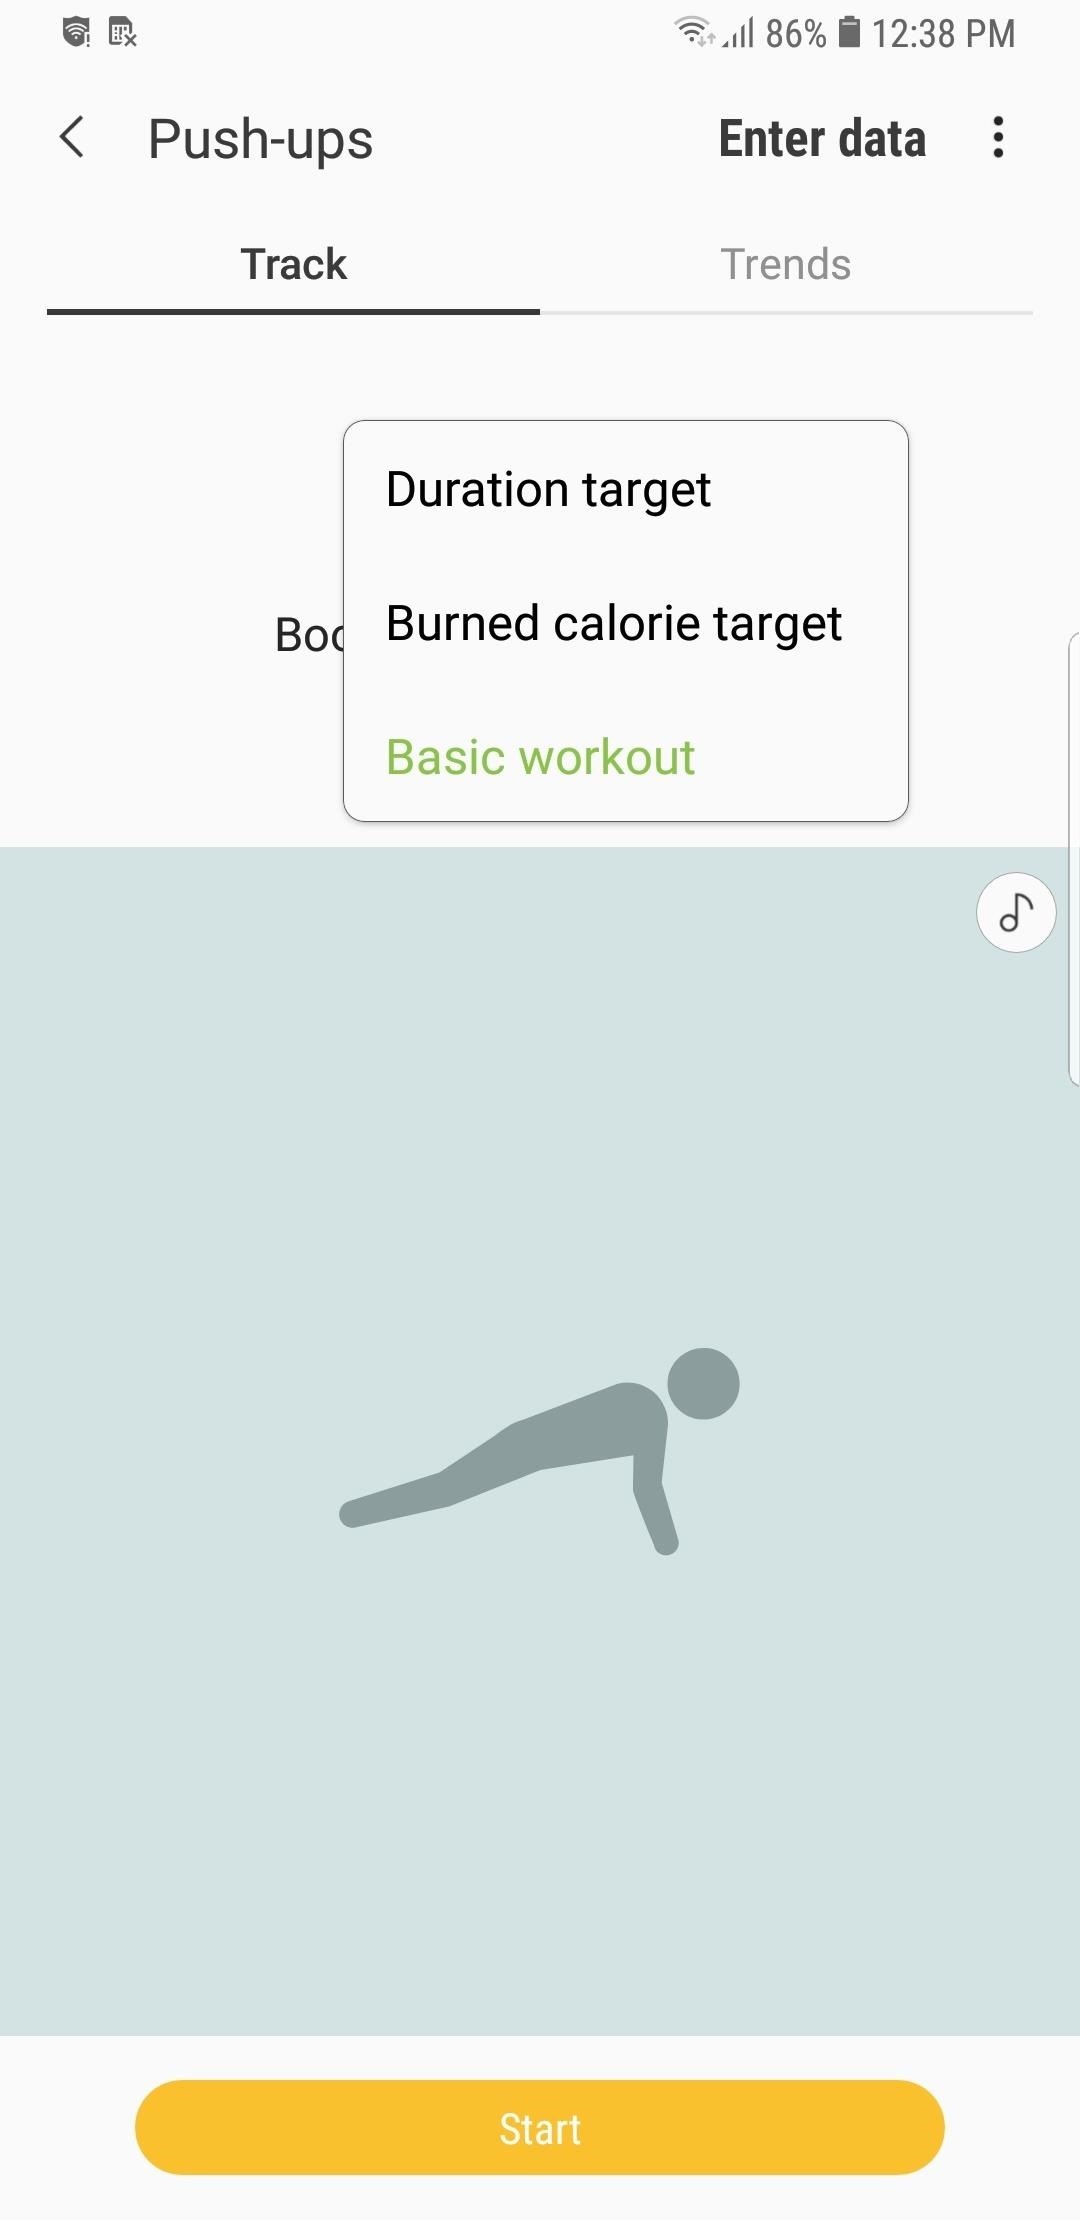 How to Track Your Workouts with Samsung Health